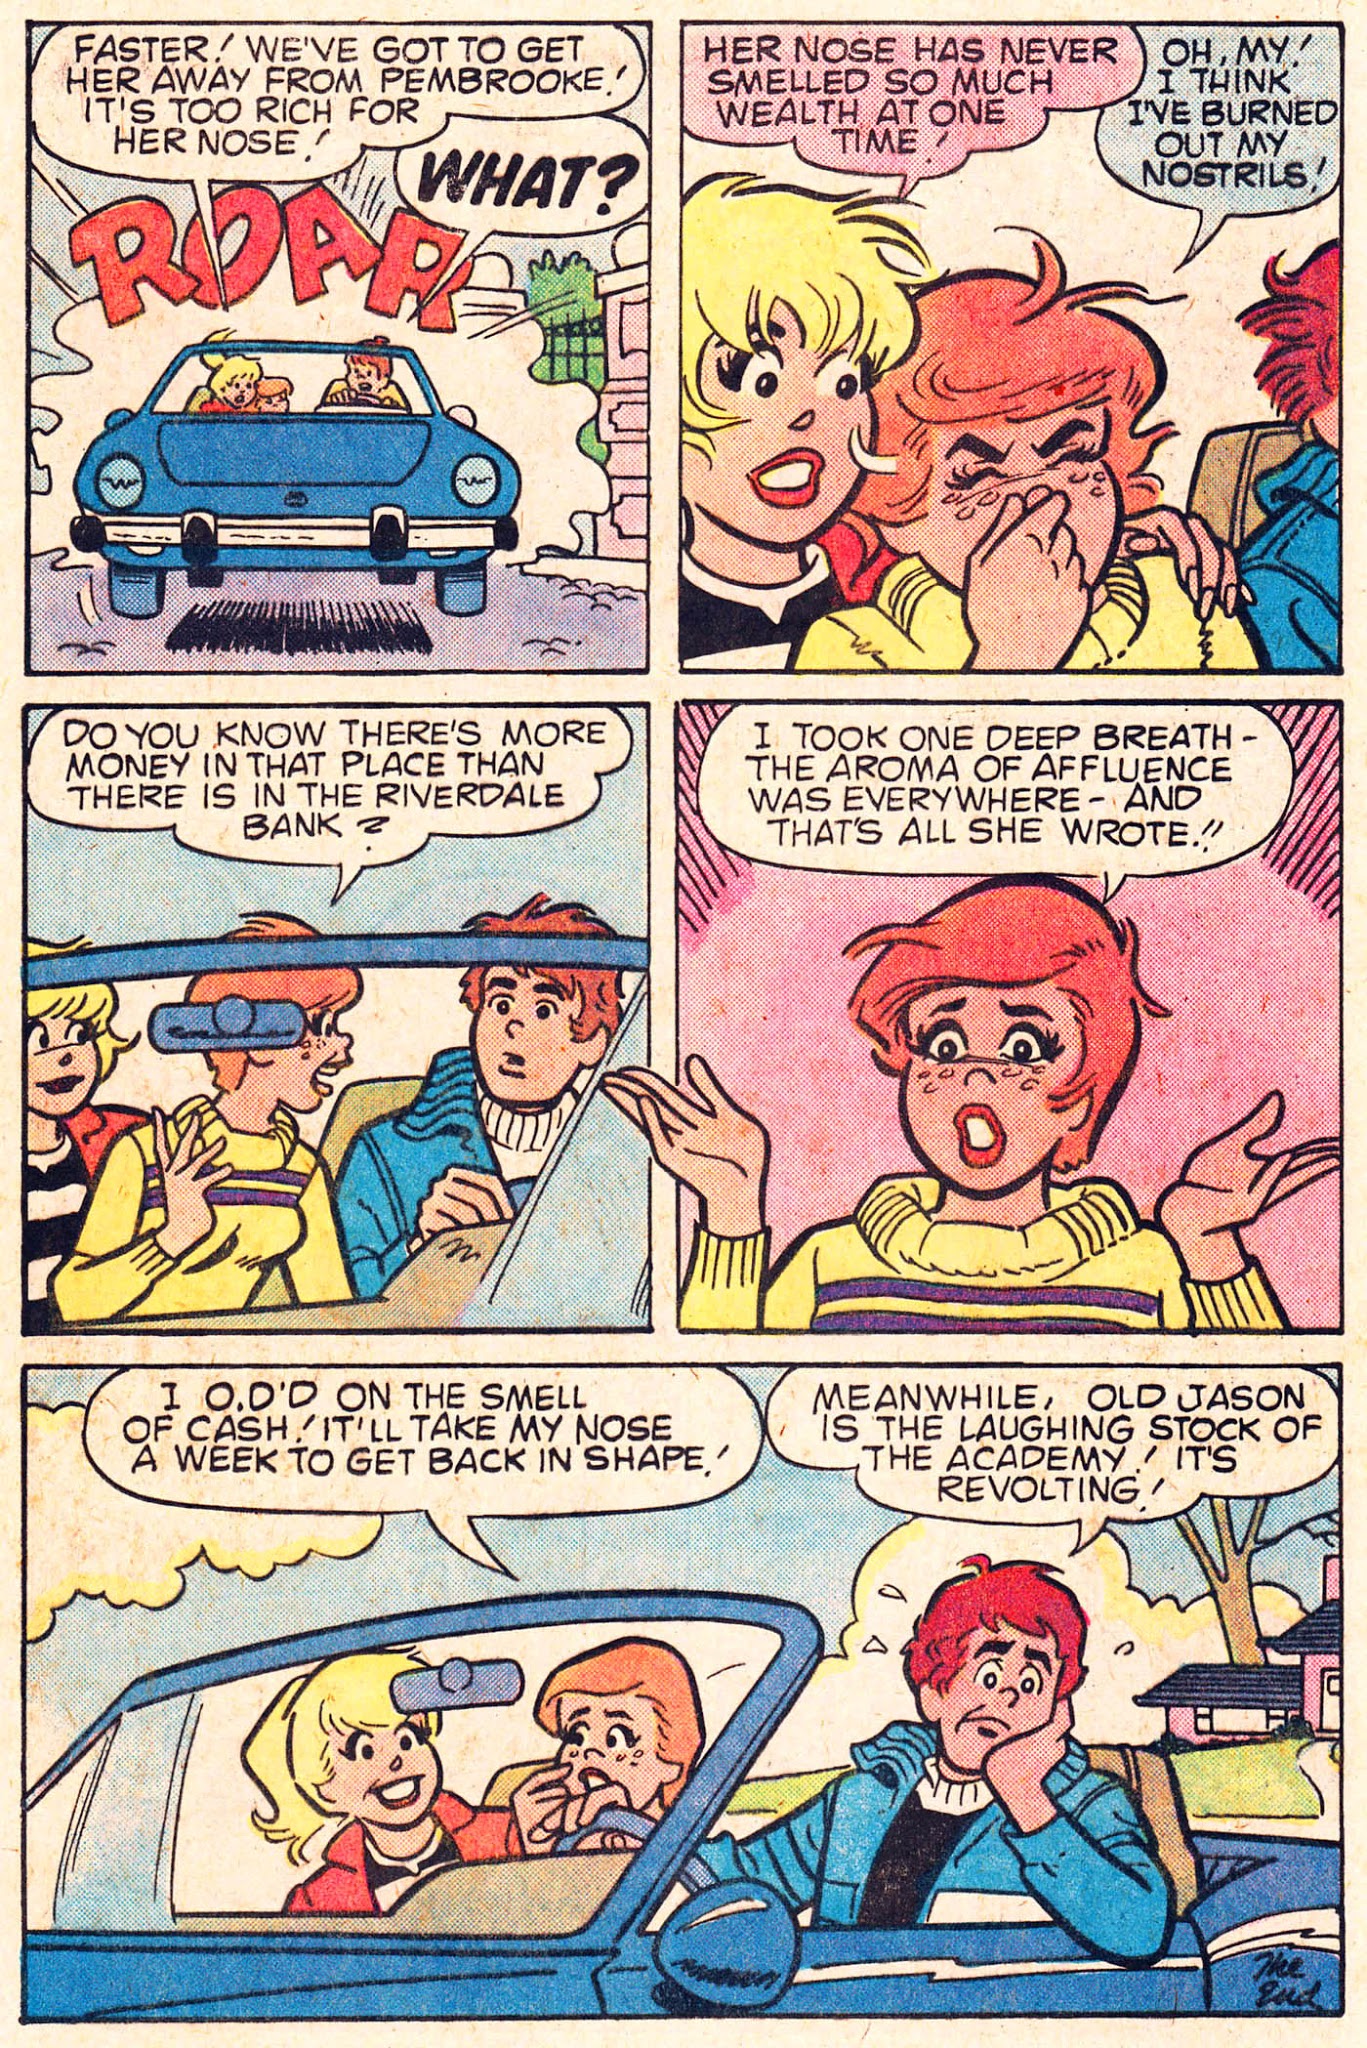 Read online Archie's Girls Betty and Veronica comic -  Issue #324 - 24